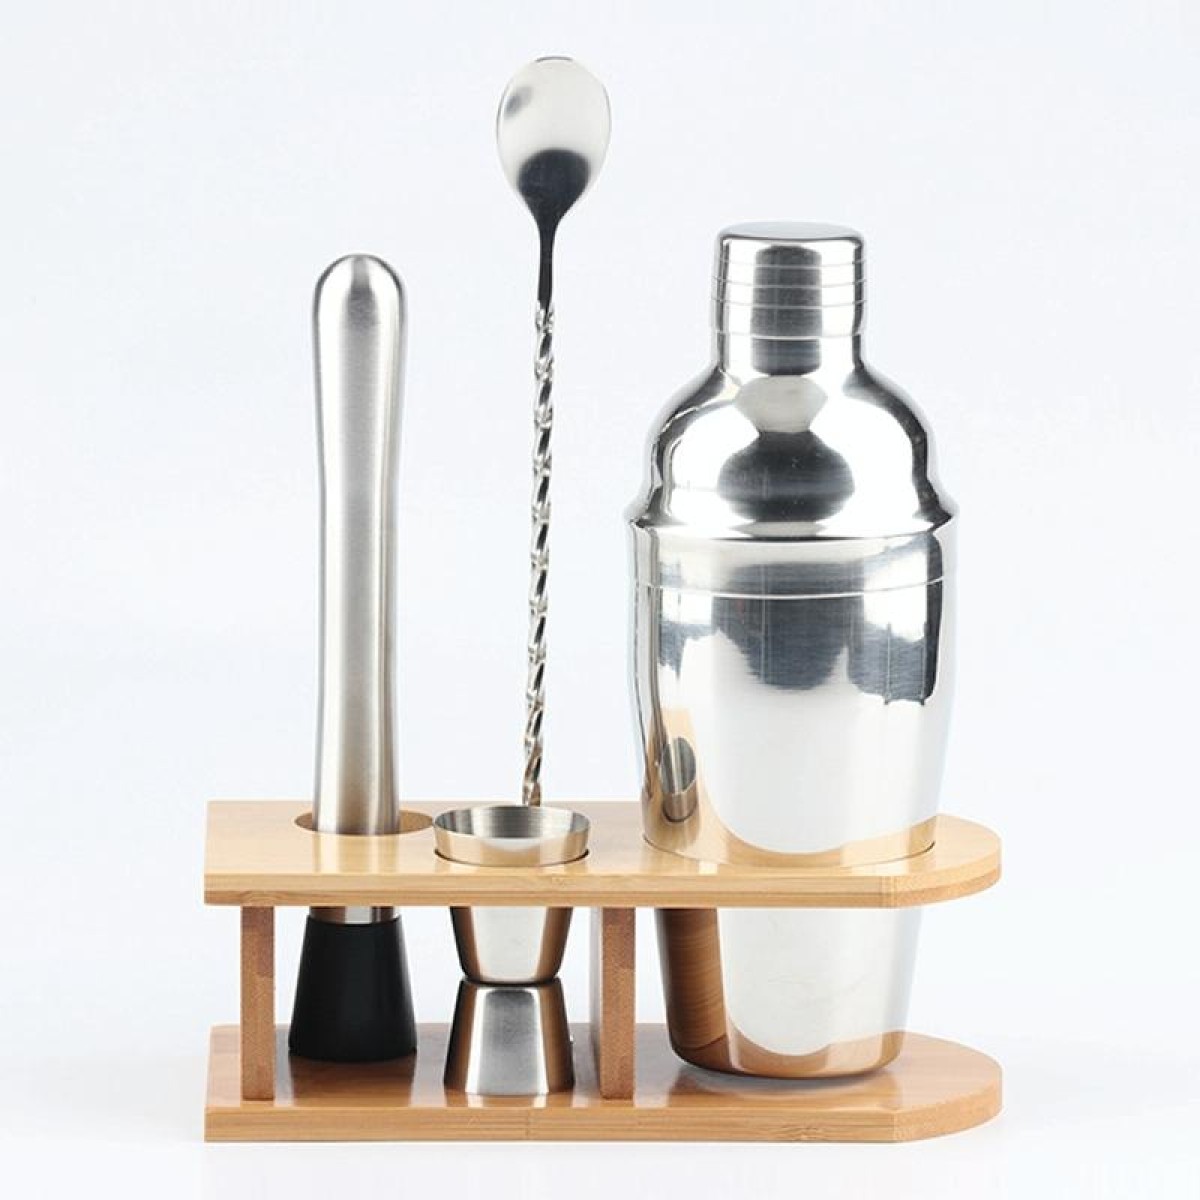 350ml 4 In 1 Stainless Steel Mixer Set With Bamboo Stand Shaker Tools